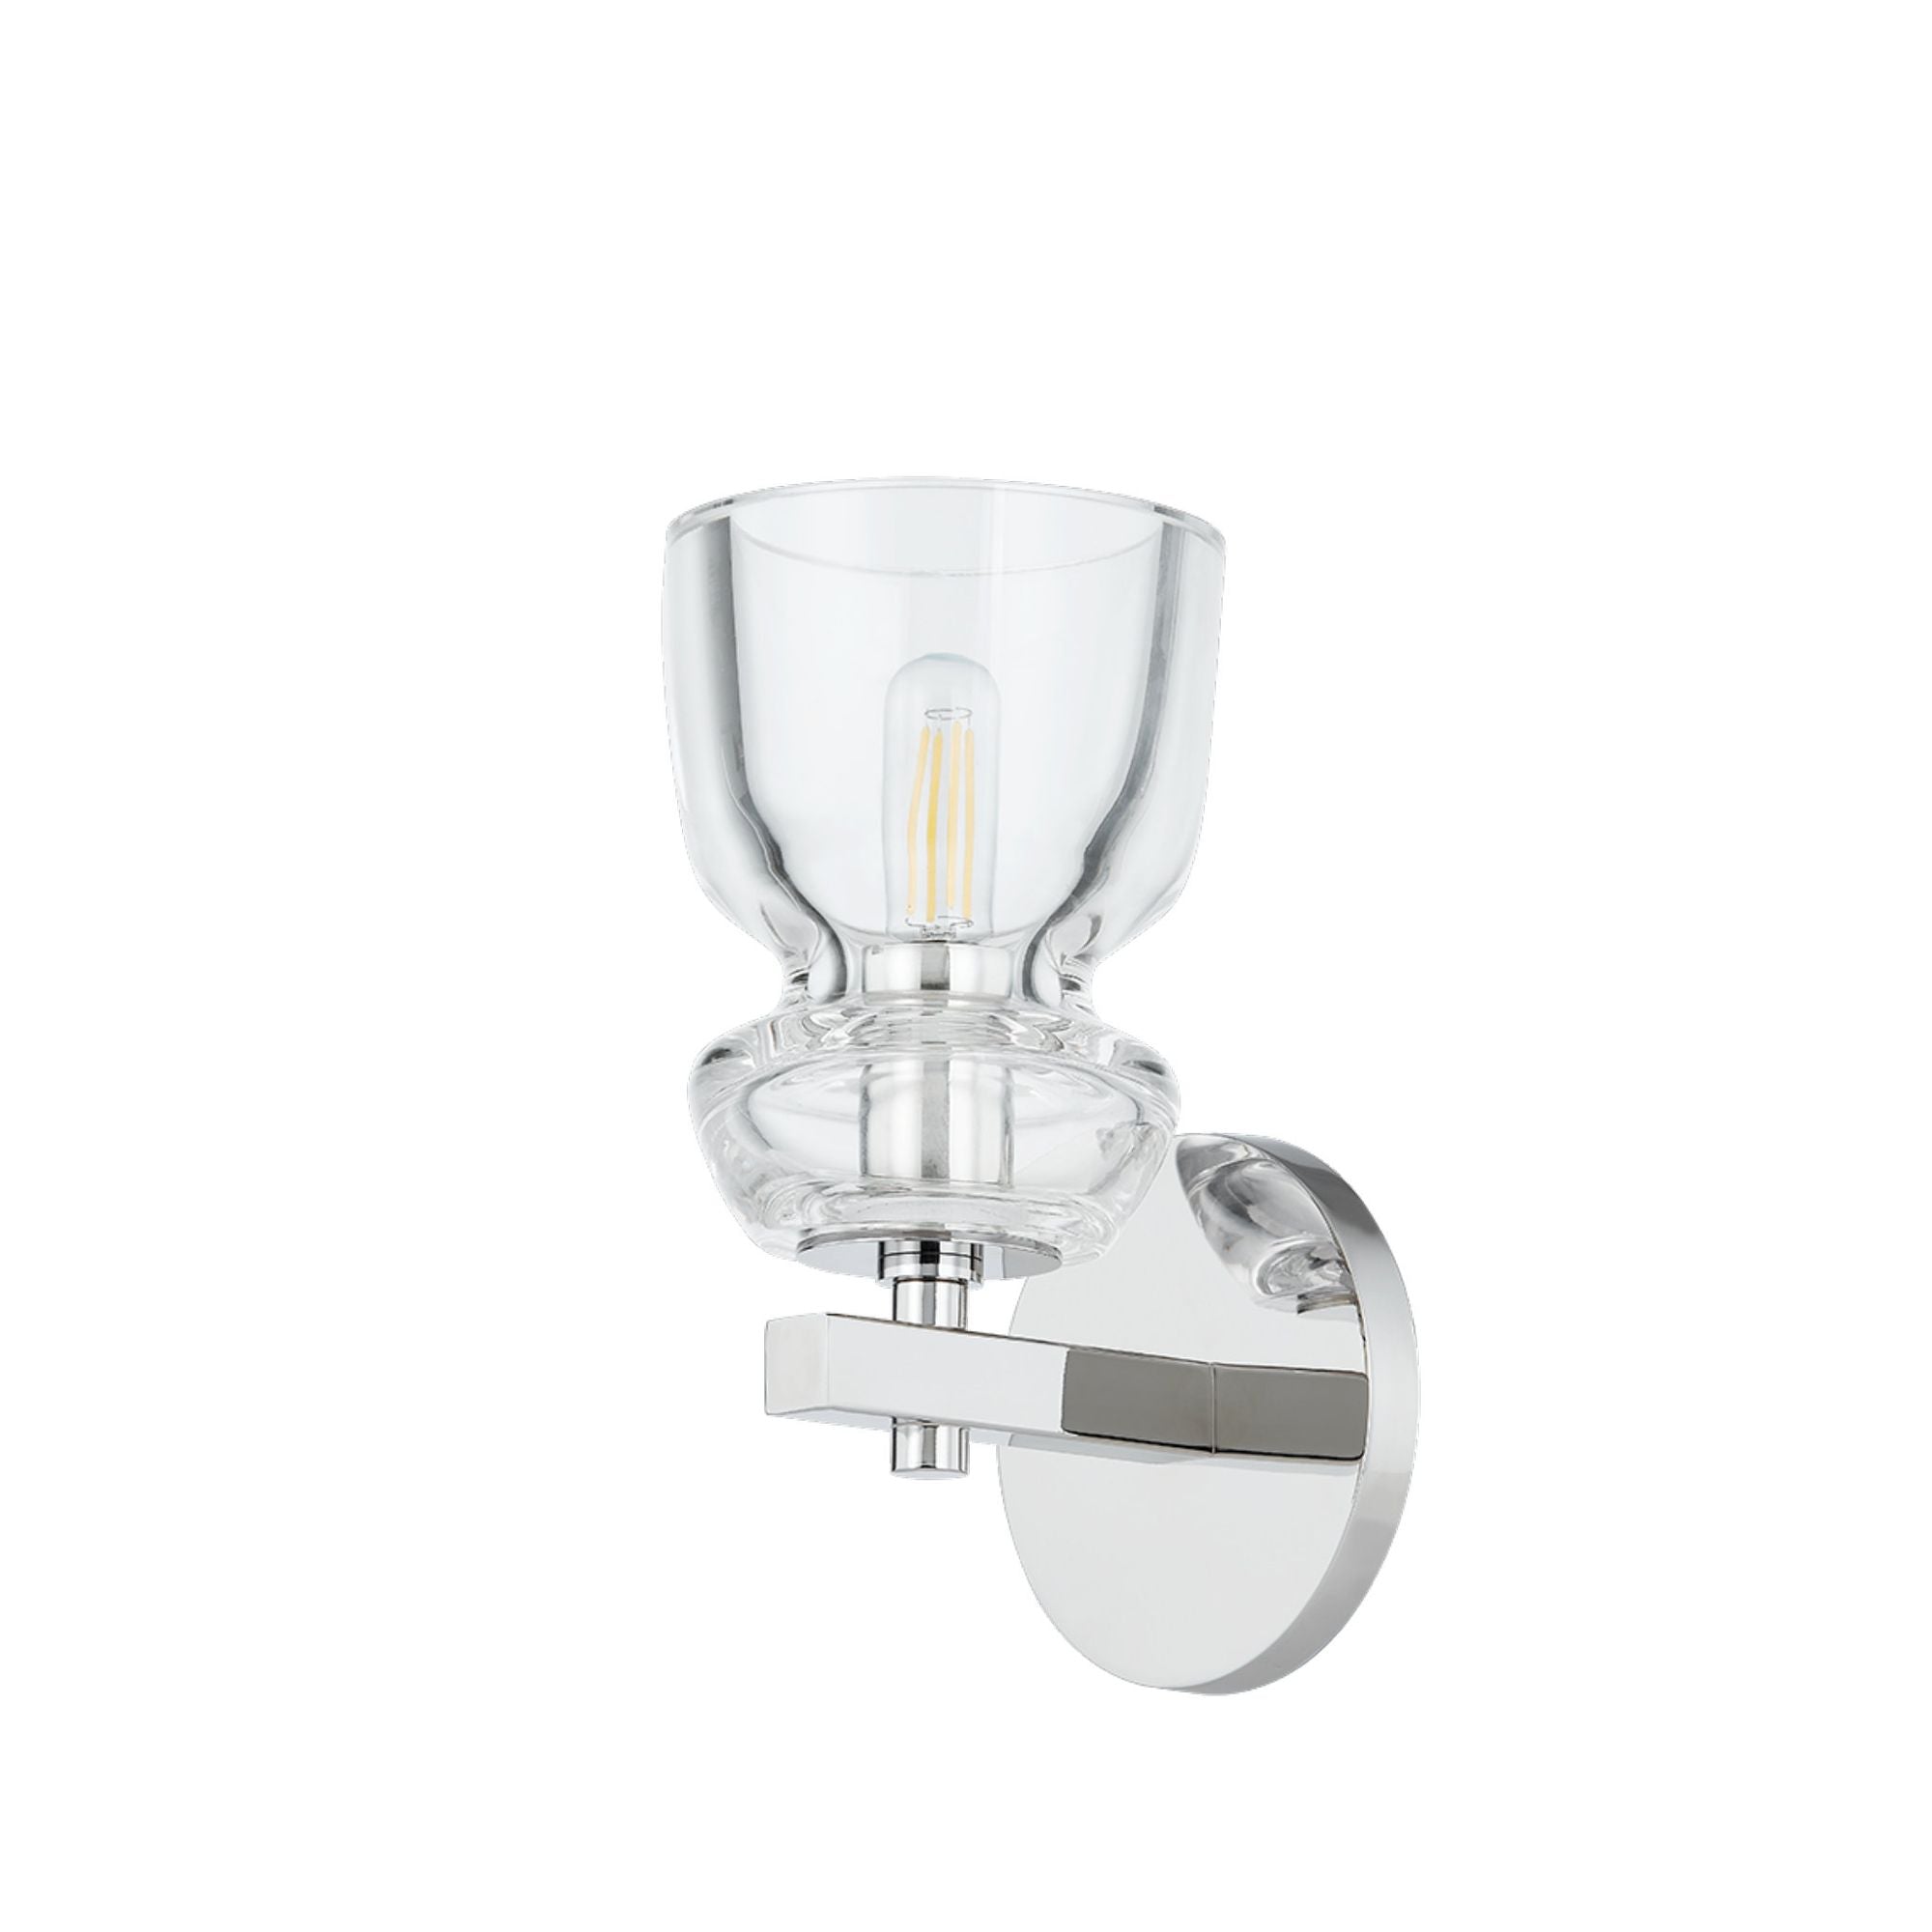 Trey 1 Light Wall Sconce in Polished Nickel